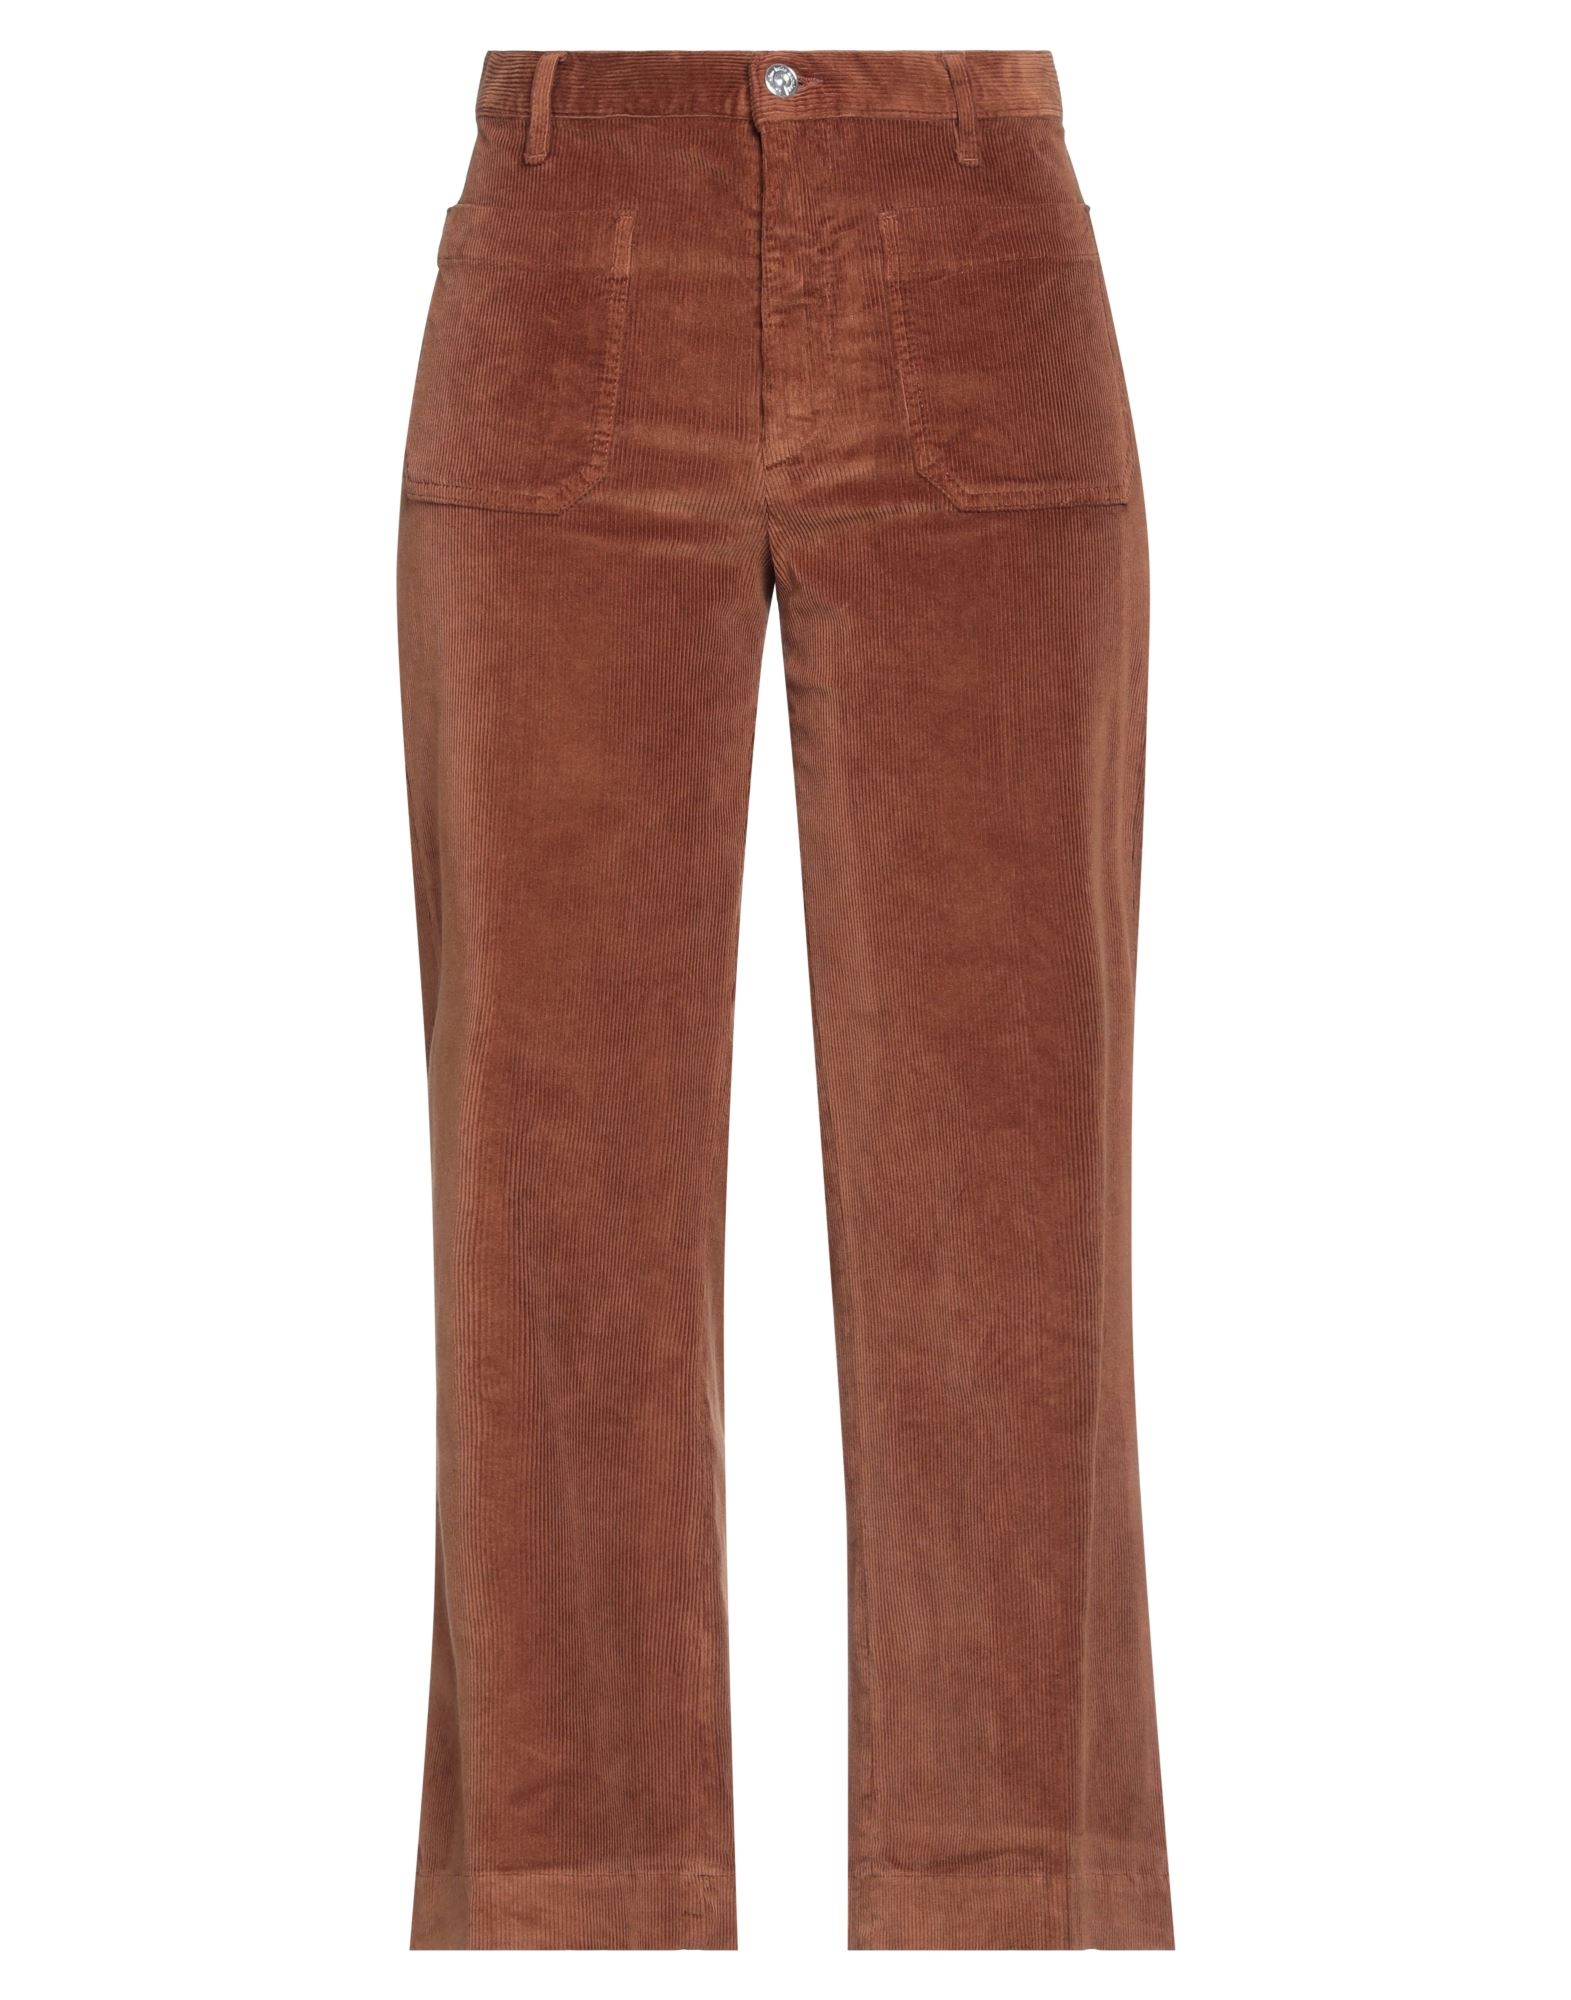 Nine:inthe:morning Nine In The Morning Woman Pants Tan Size 27 Cotton, Modal, Elastane In Brown